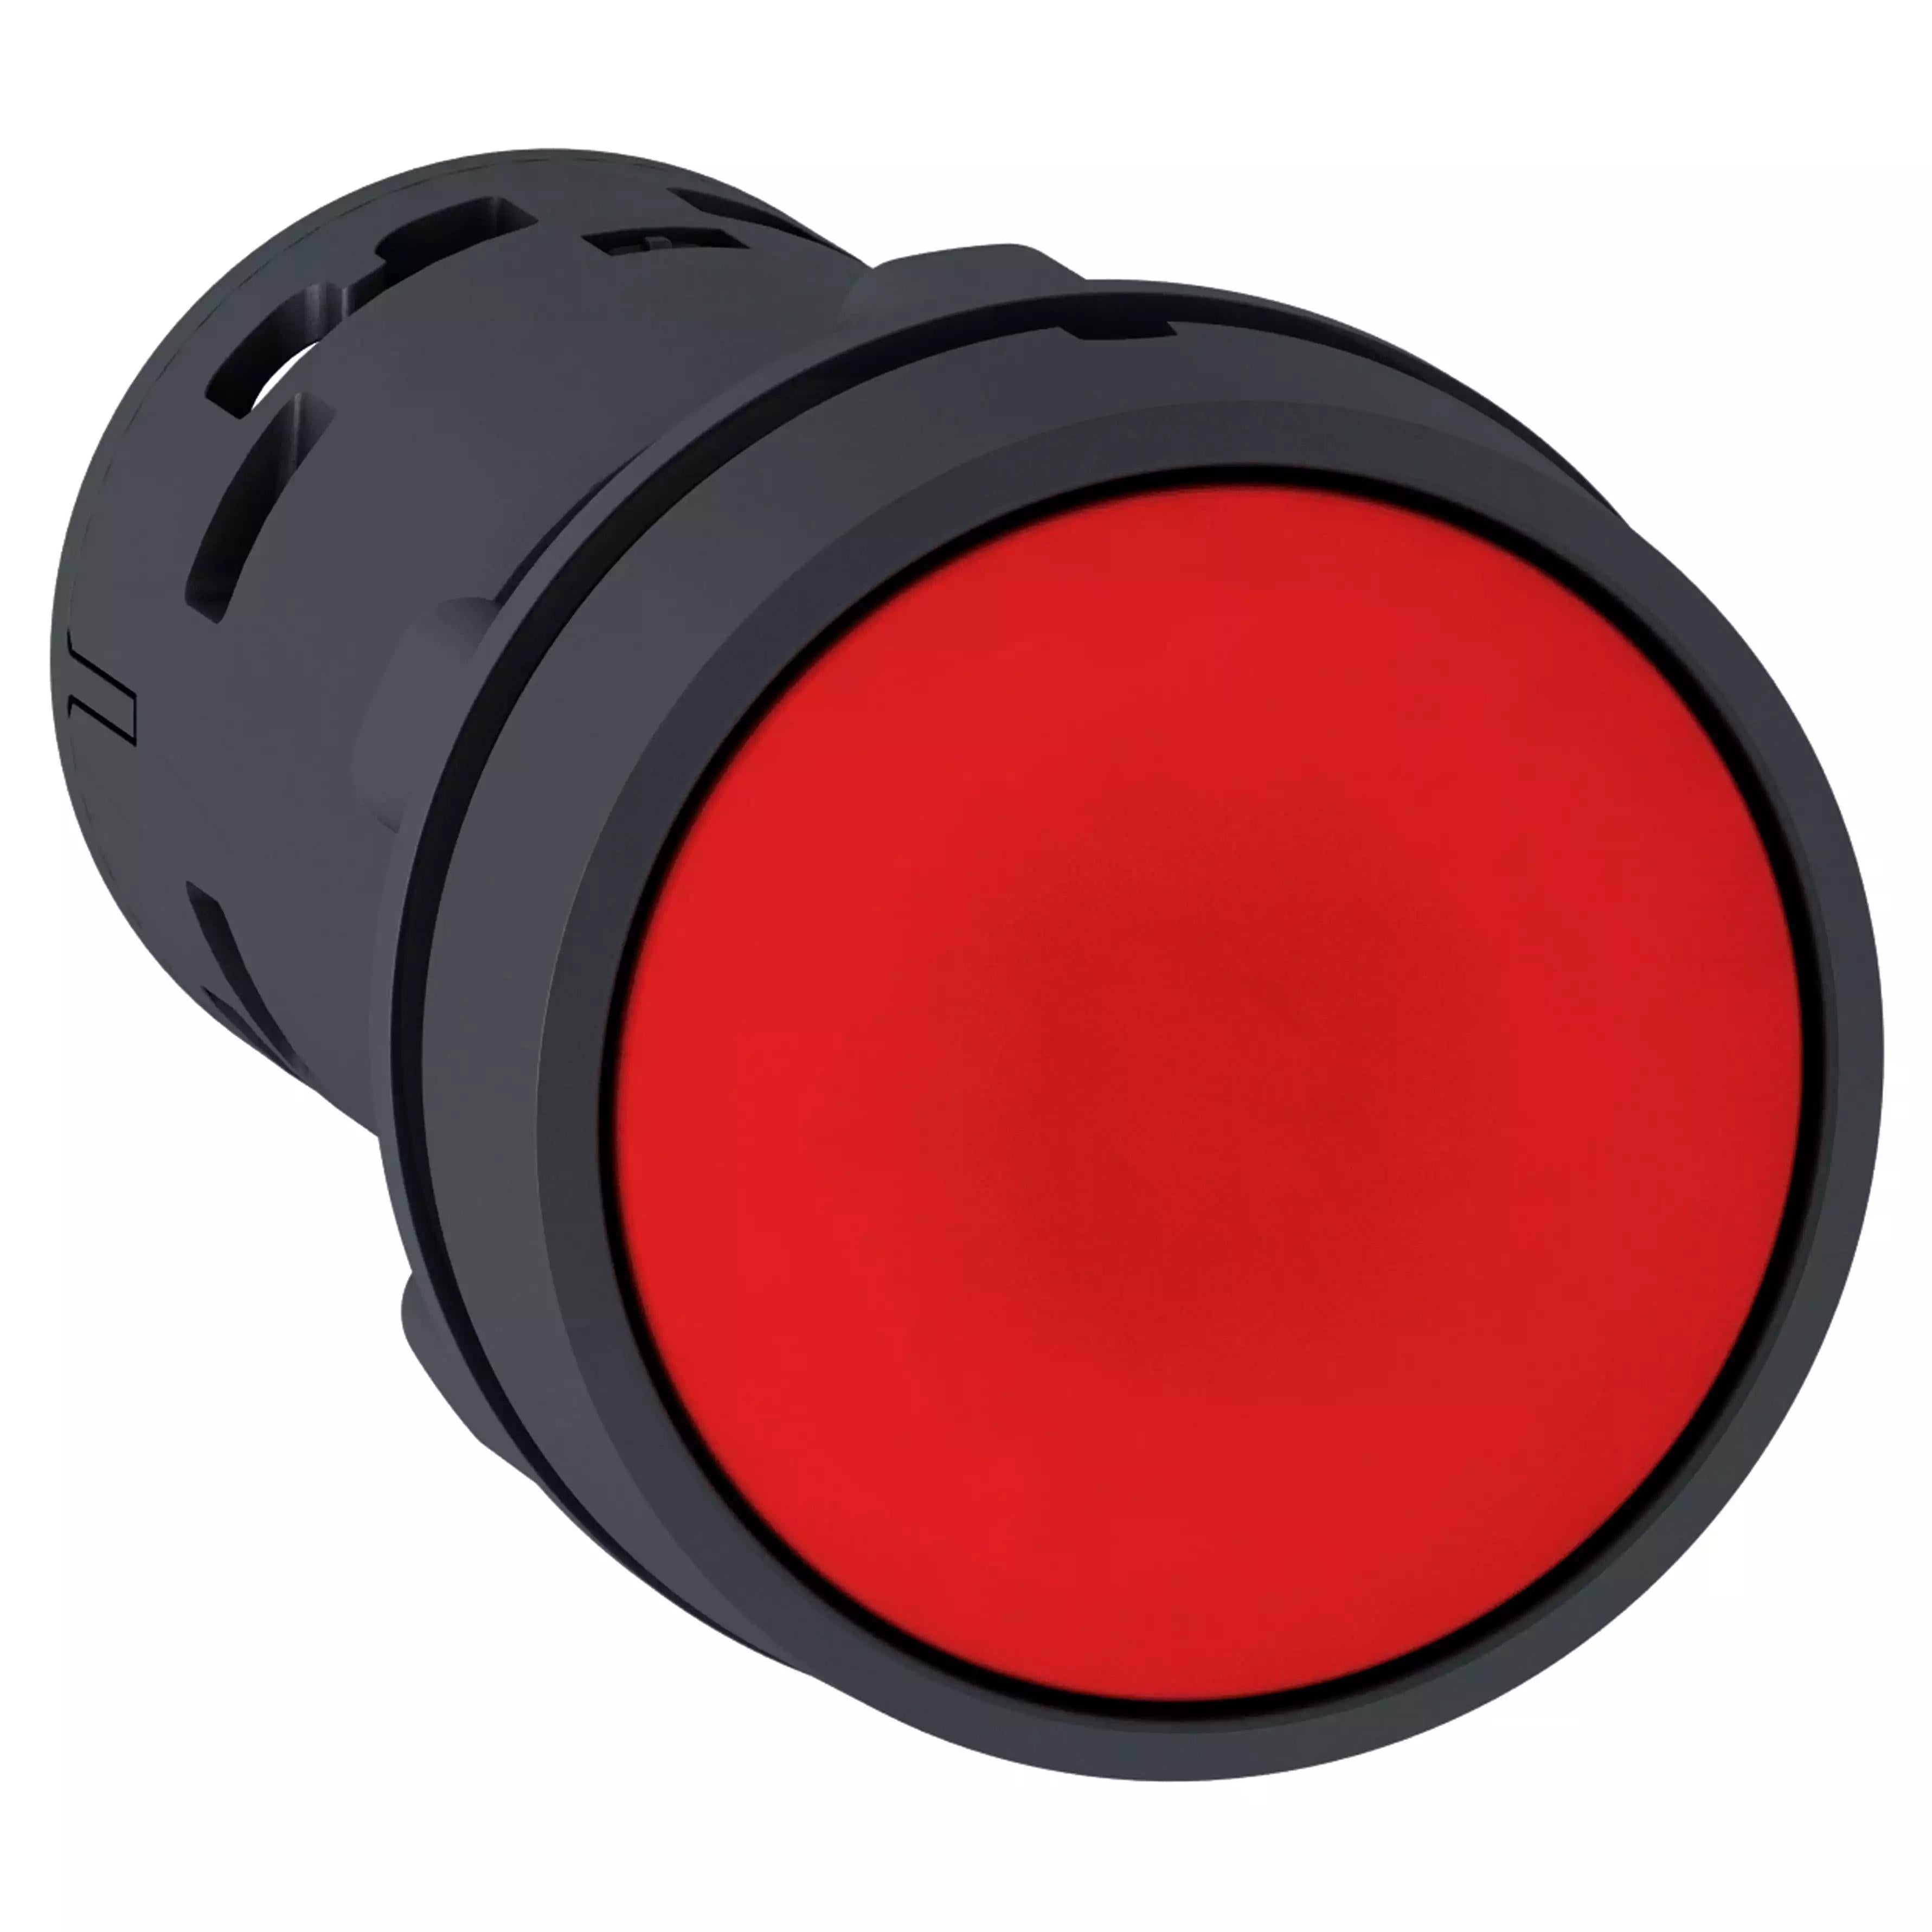 Monolithic push button, Harmony XB7, plastic, red, 22mm, spring return, unmarked, 1NO+1NC